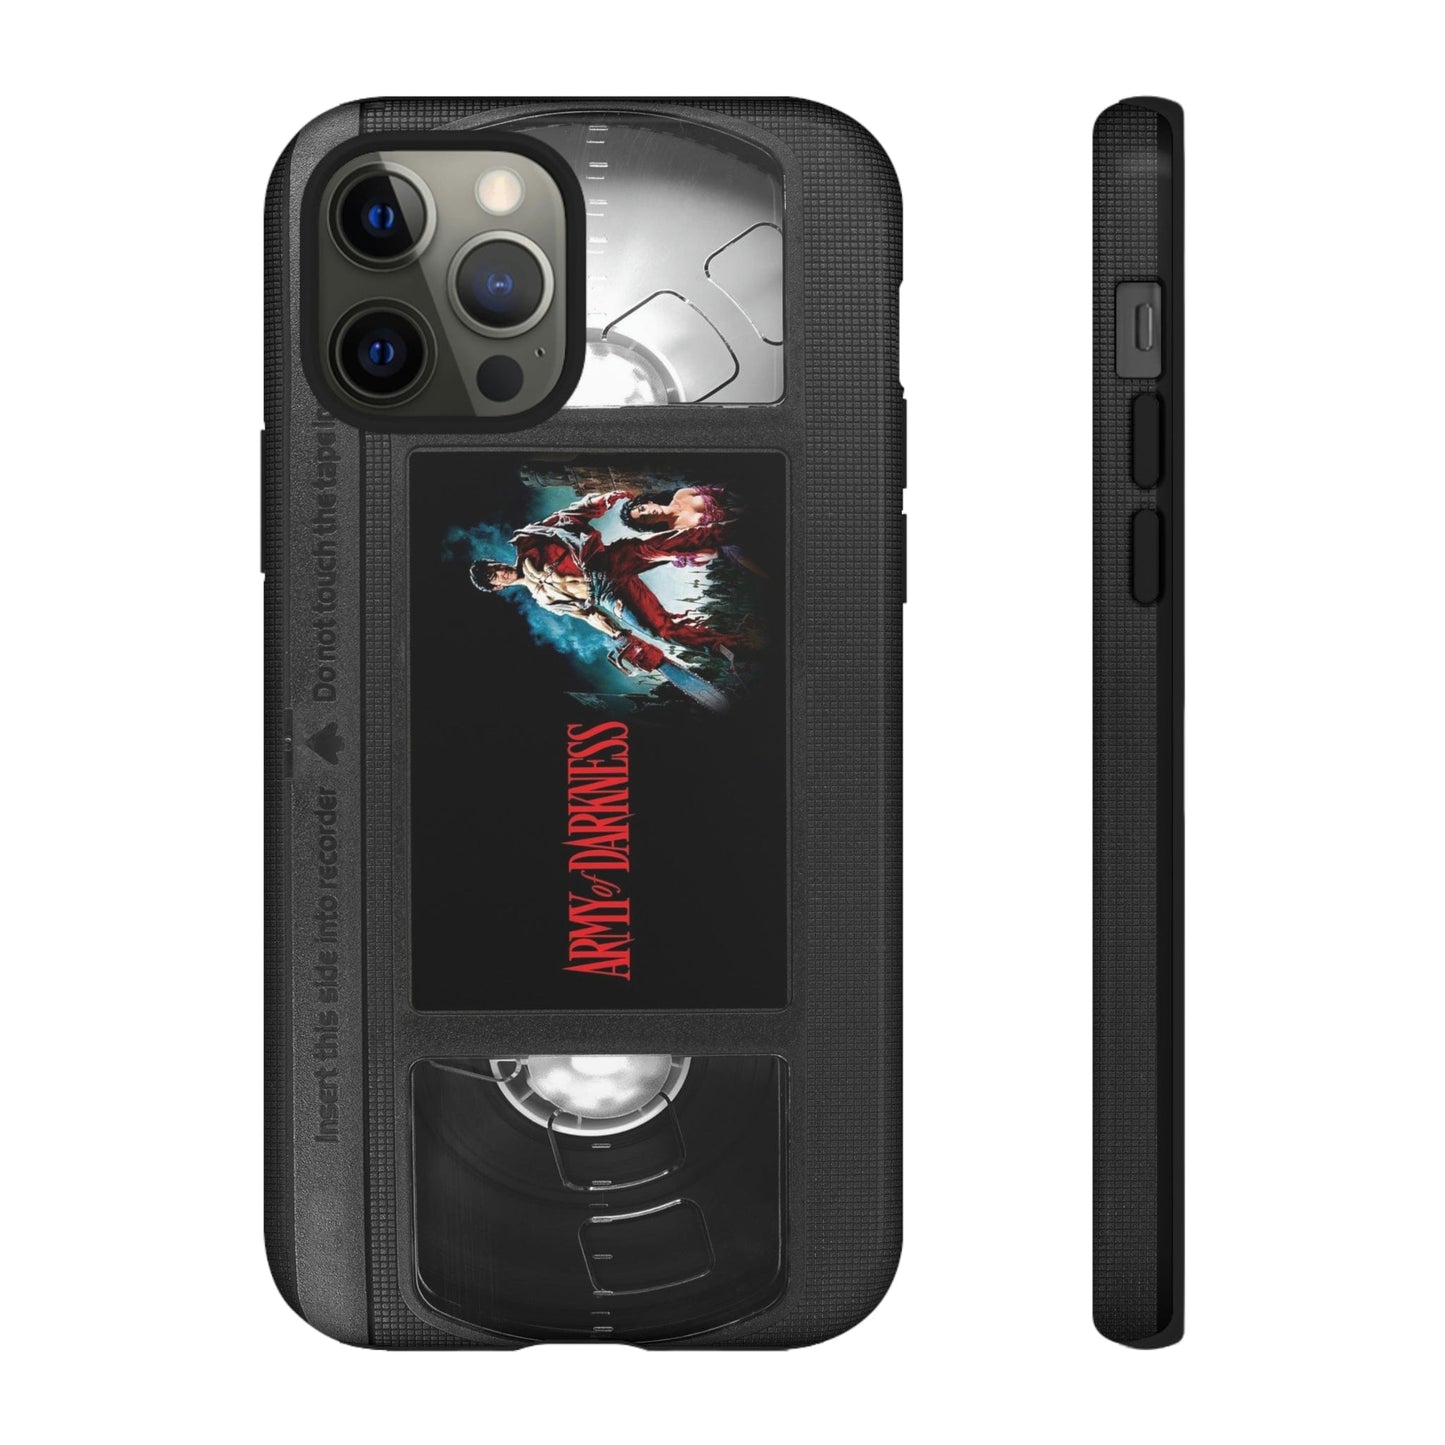 Army of Darkness Impact Resistant VHS Phone Case